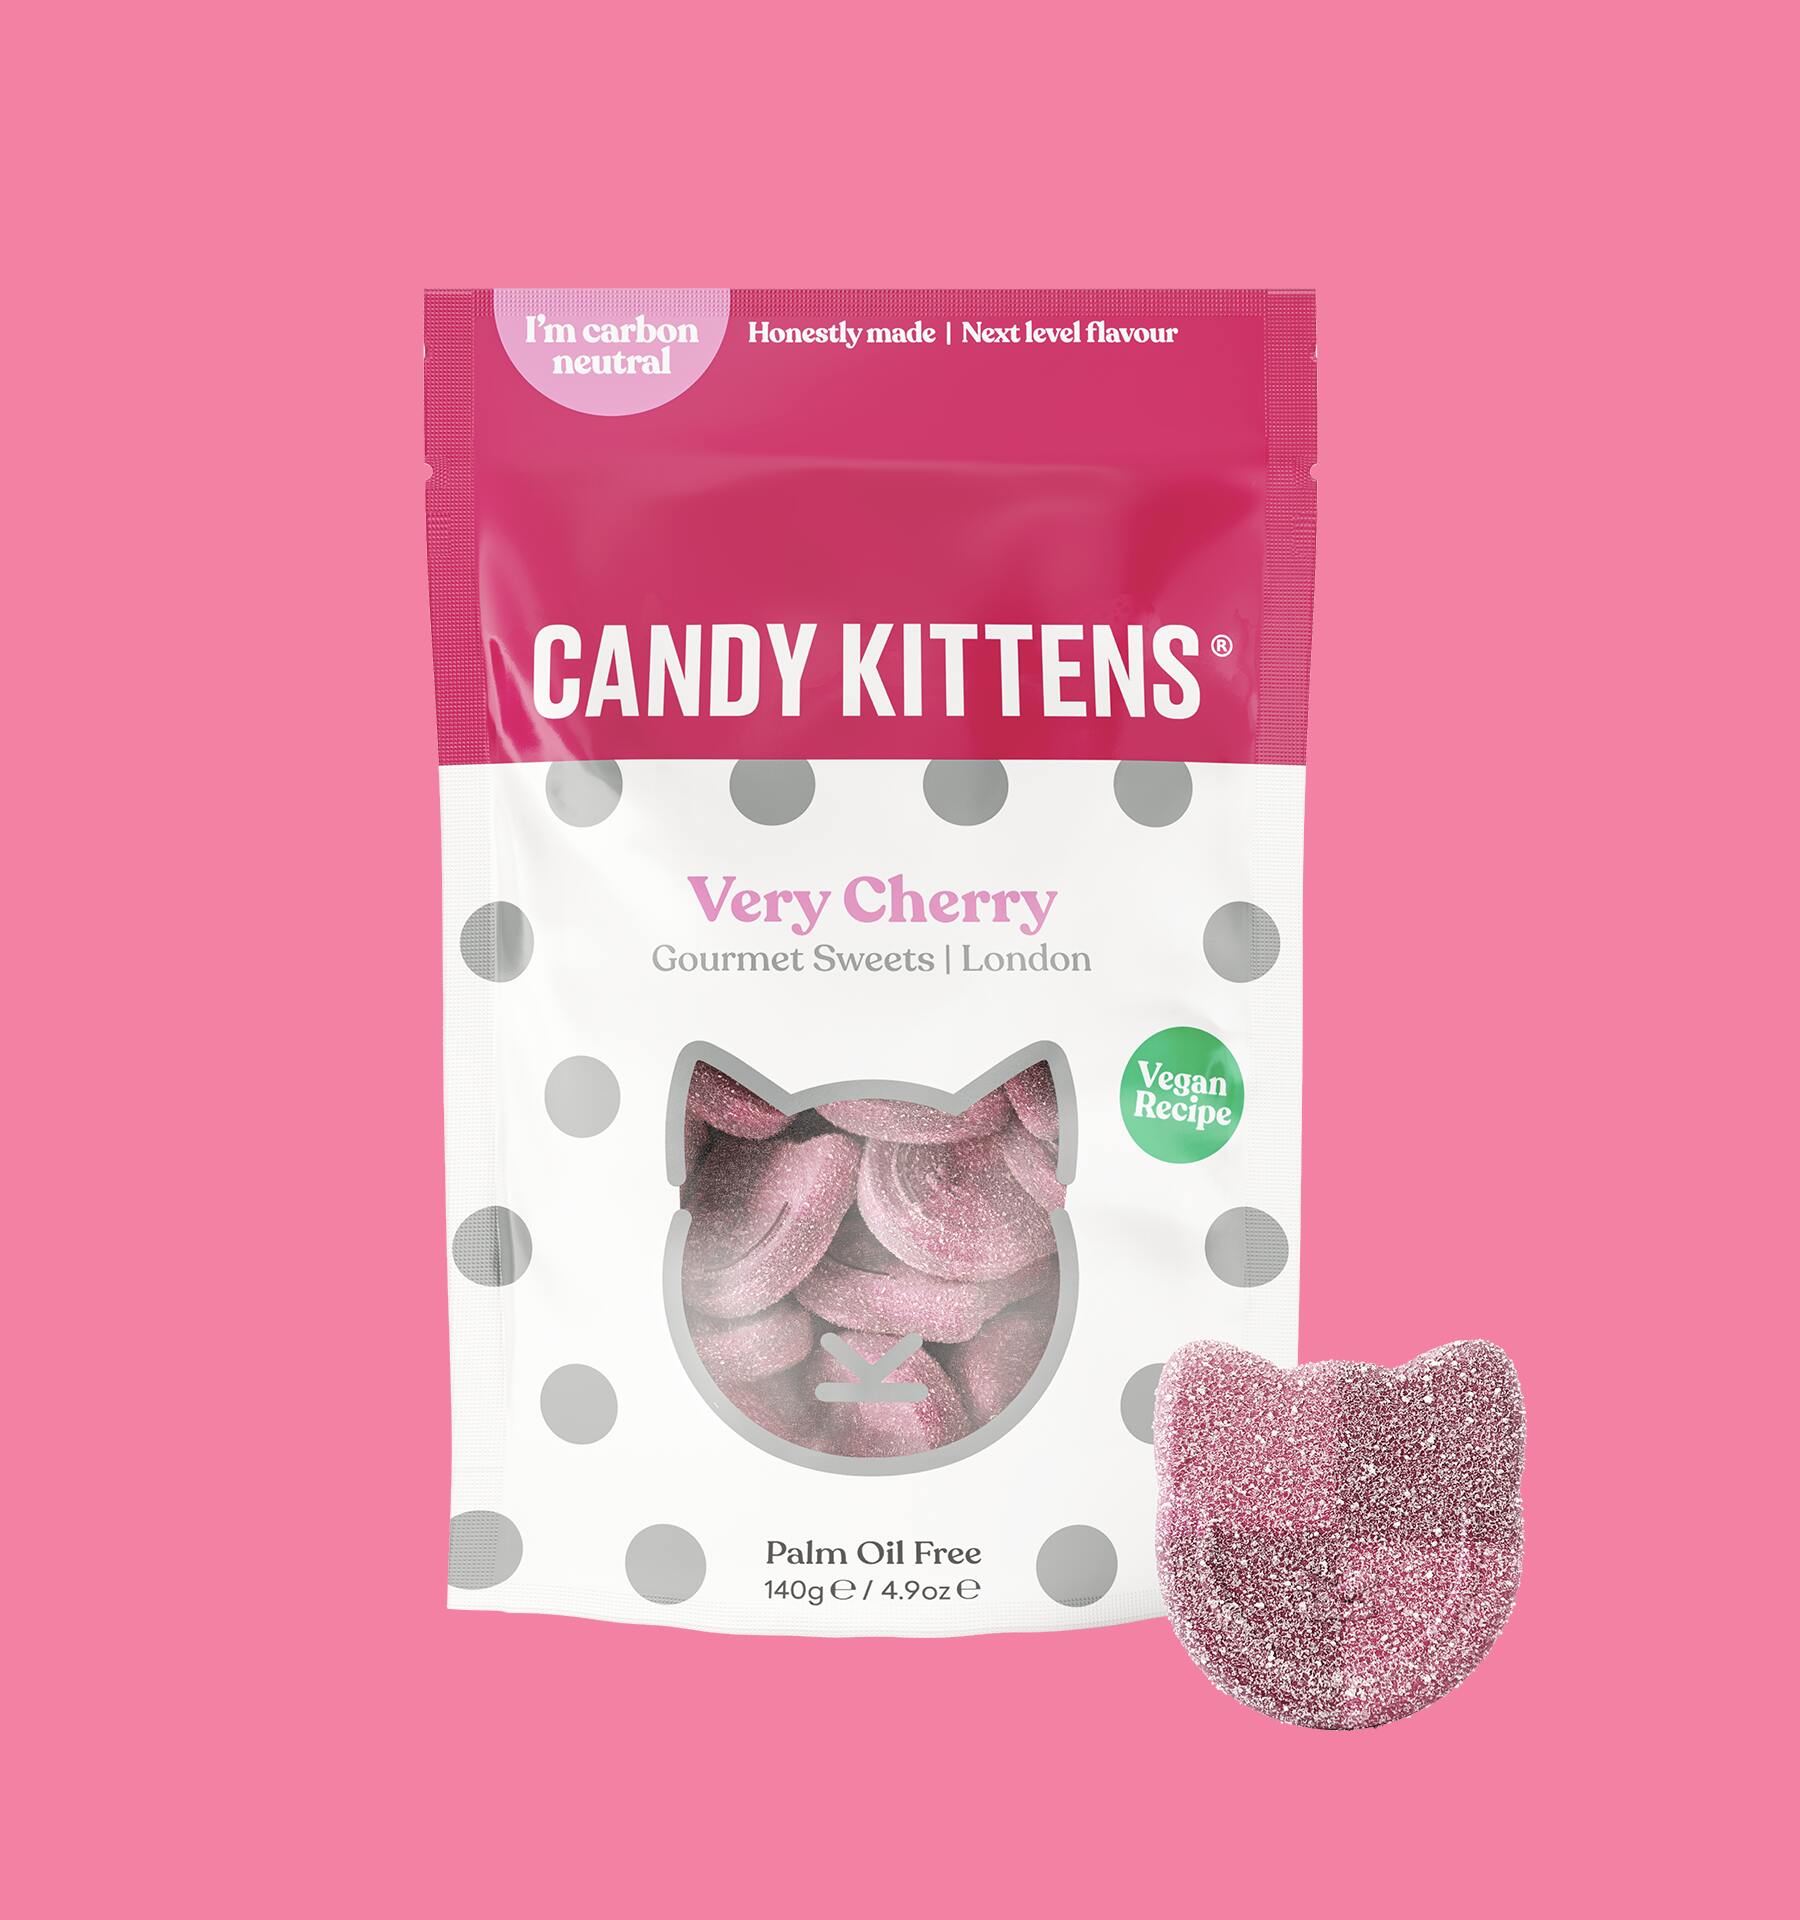 Candy Kittens Sweets 140G Bag, Very Cherry